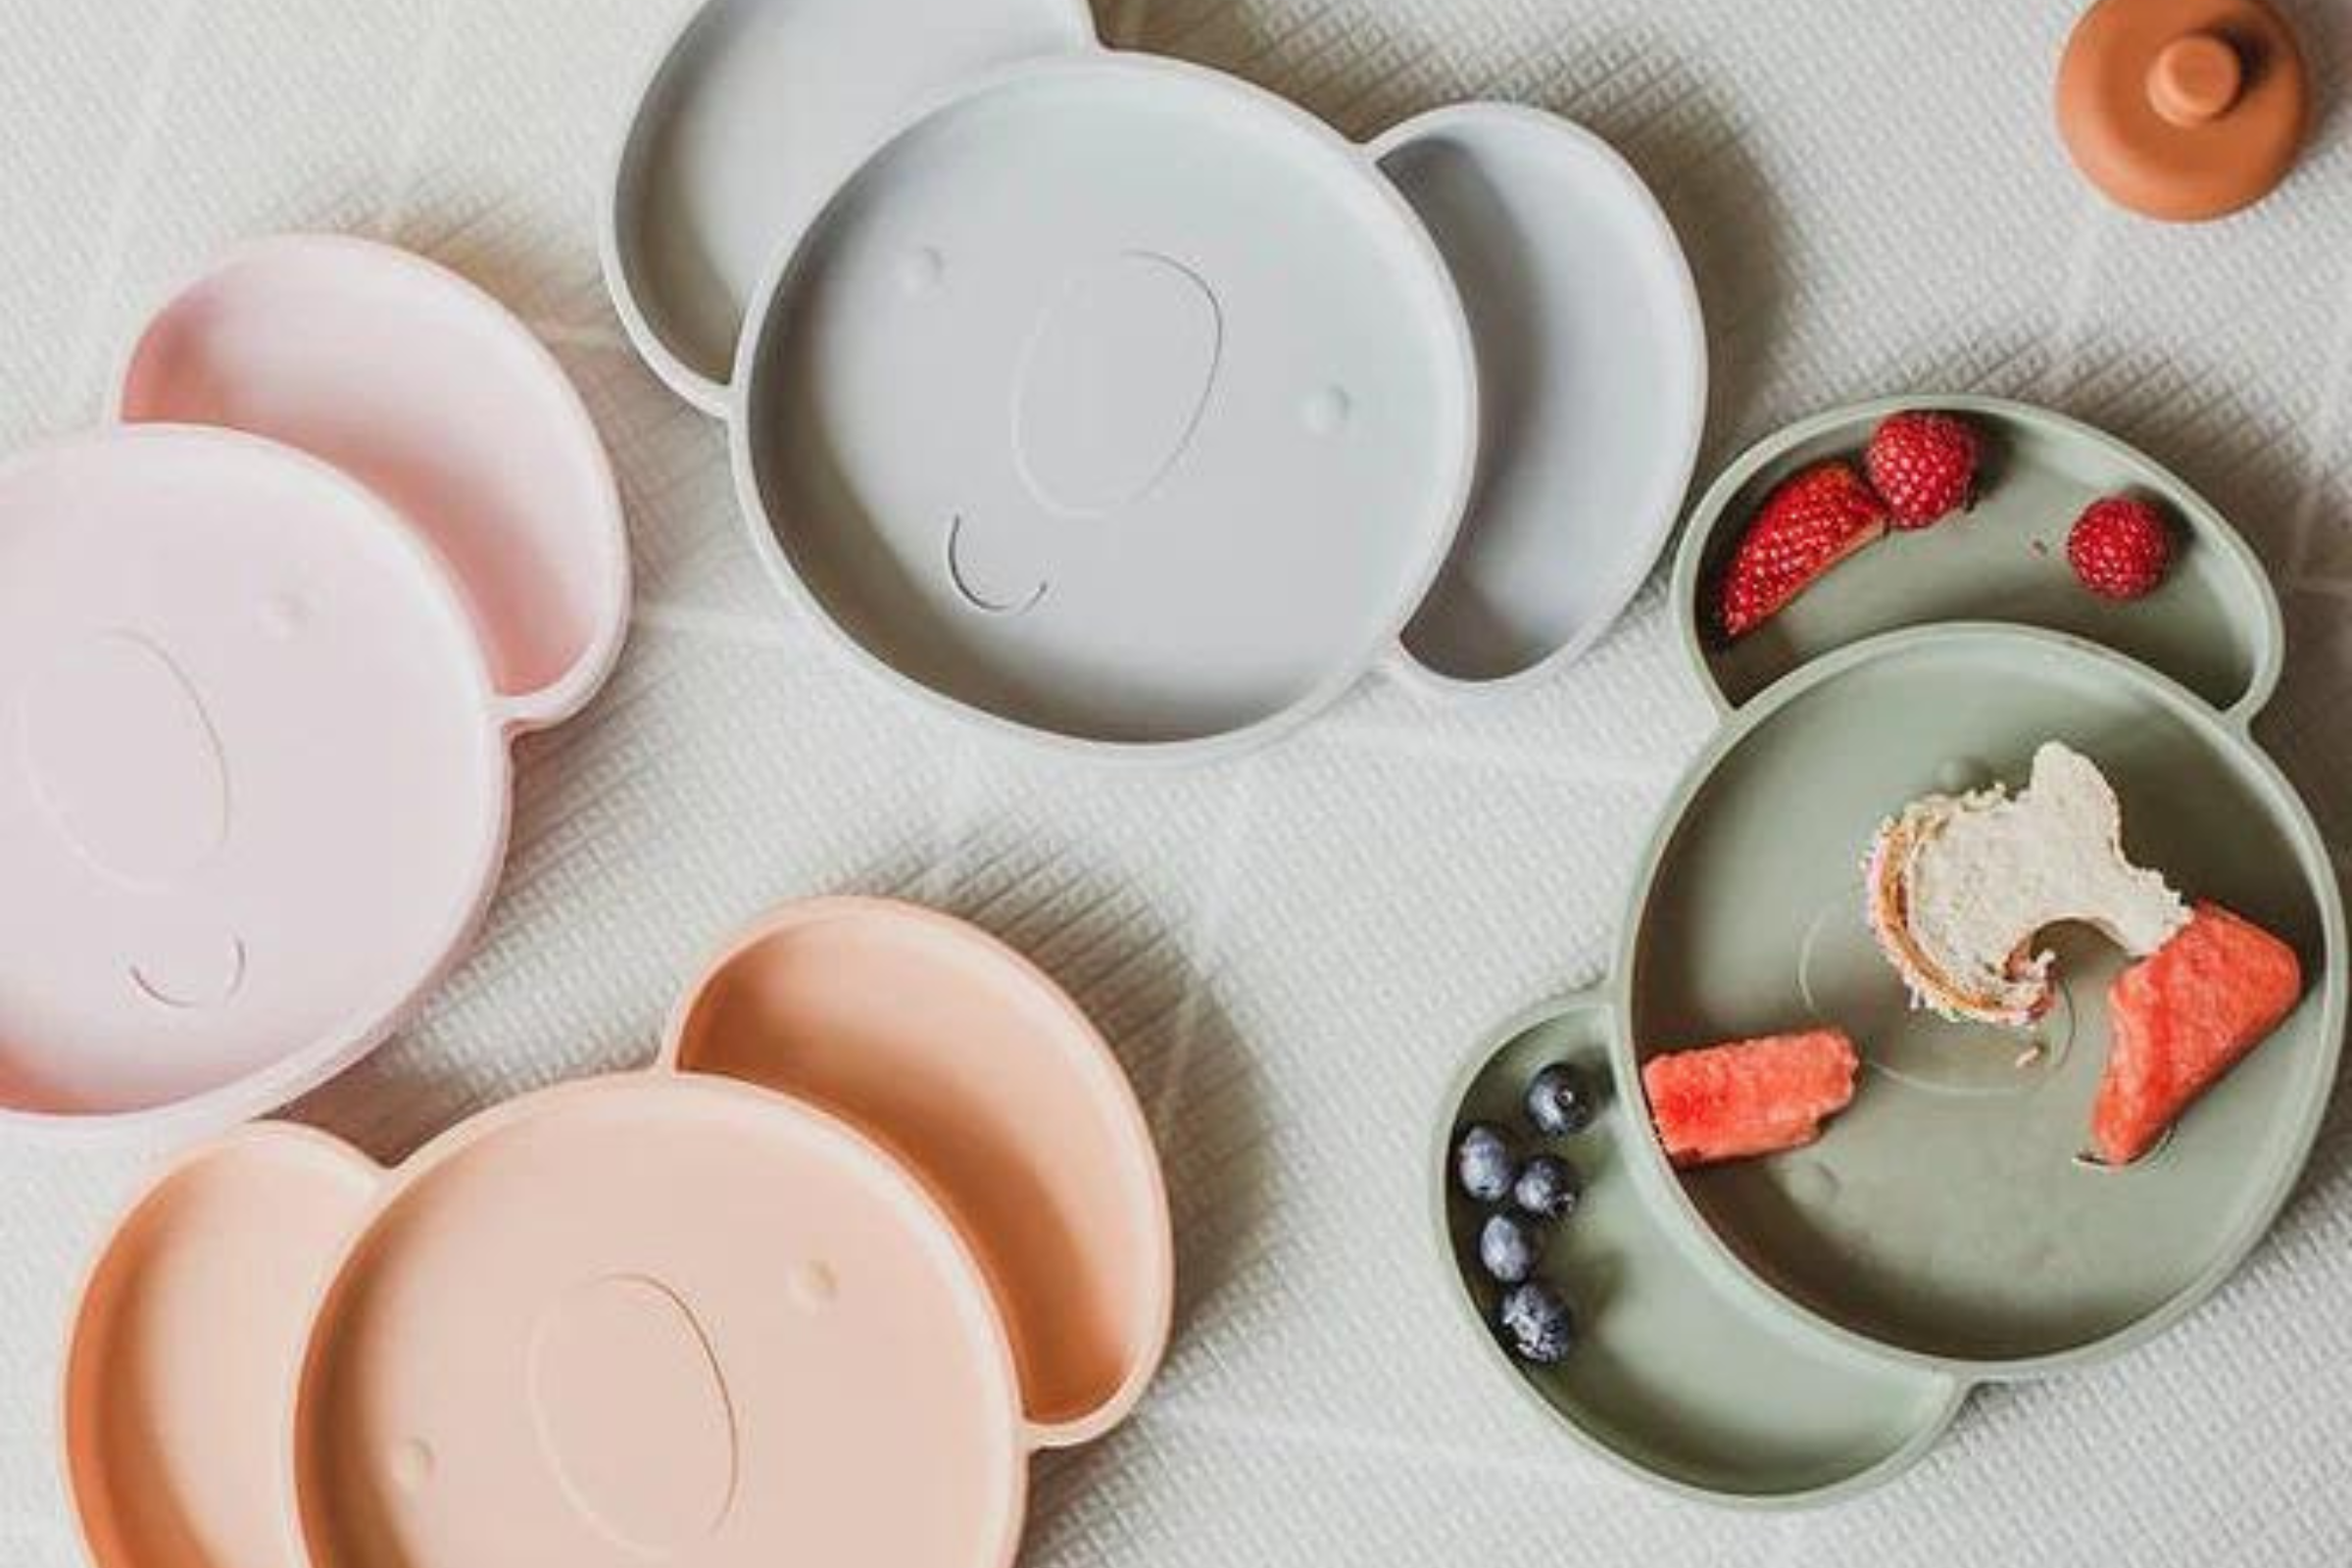 sectioned plates for toddlers